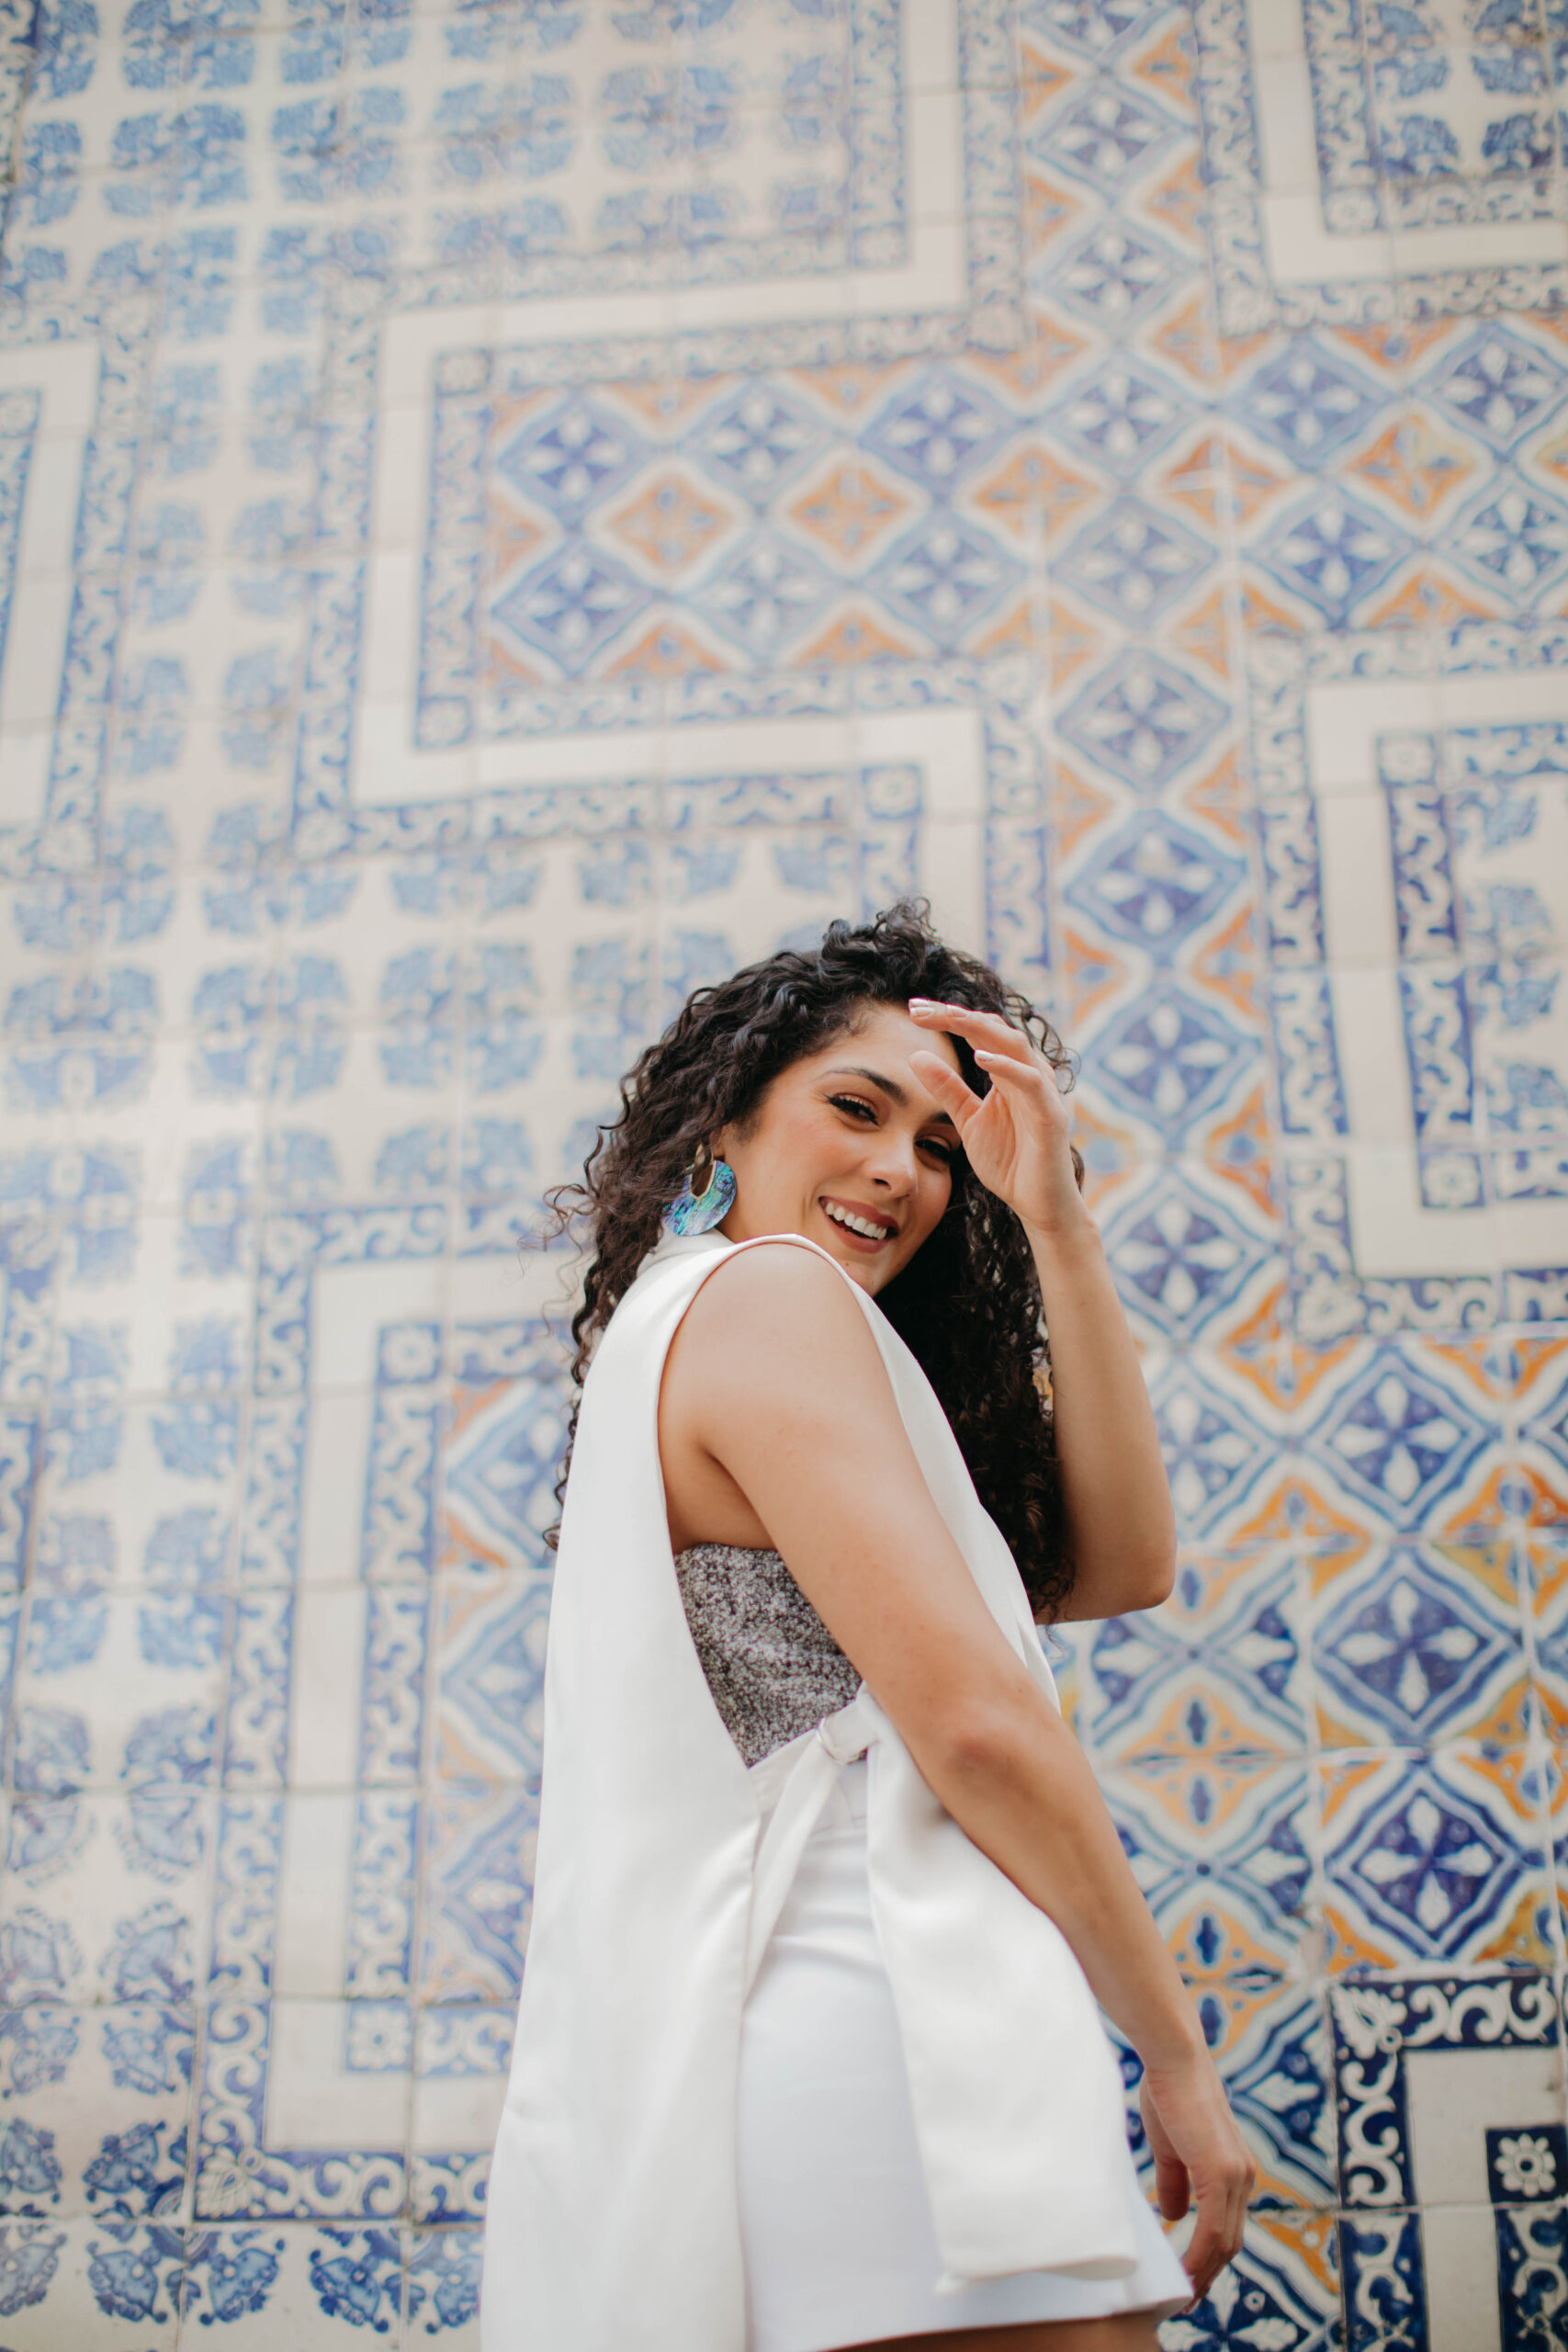 Erika Smiling over her shoulder near a blue tiled wall - EP. 92: Break up With Your Checklist Relationship with Karina F. Daves